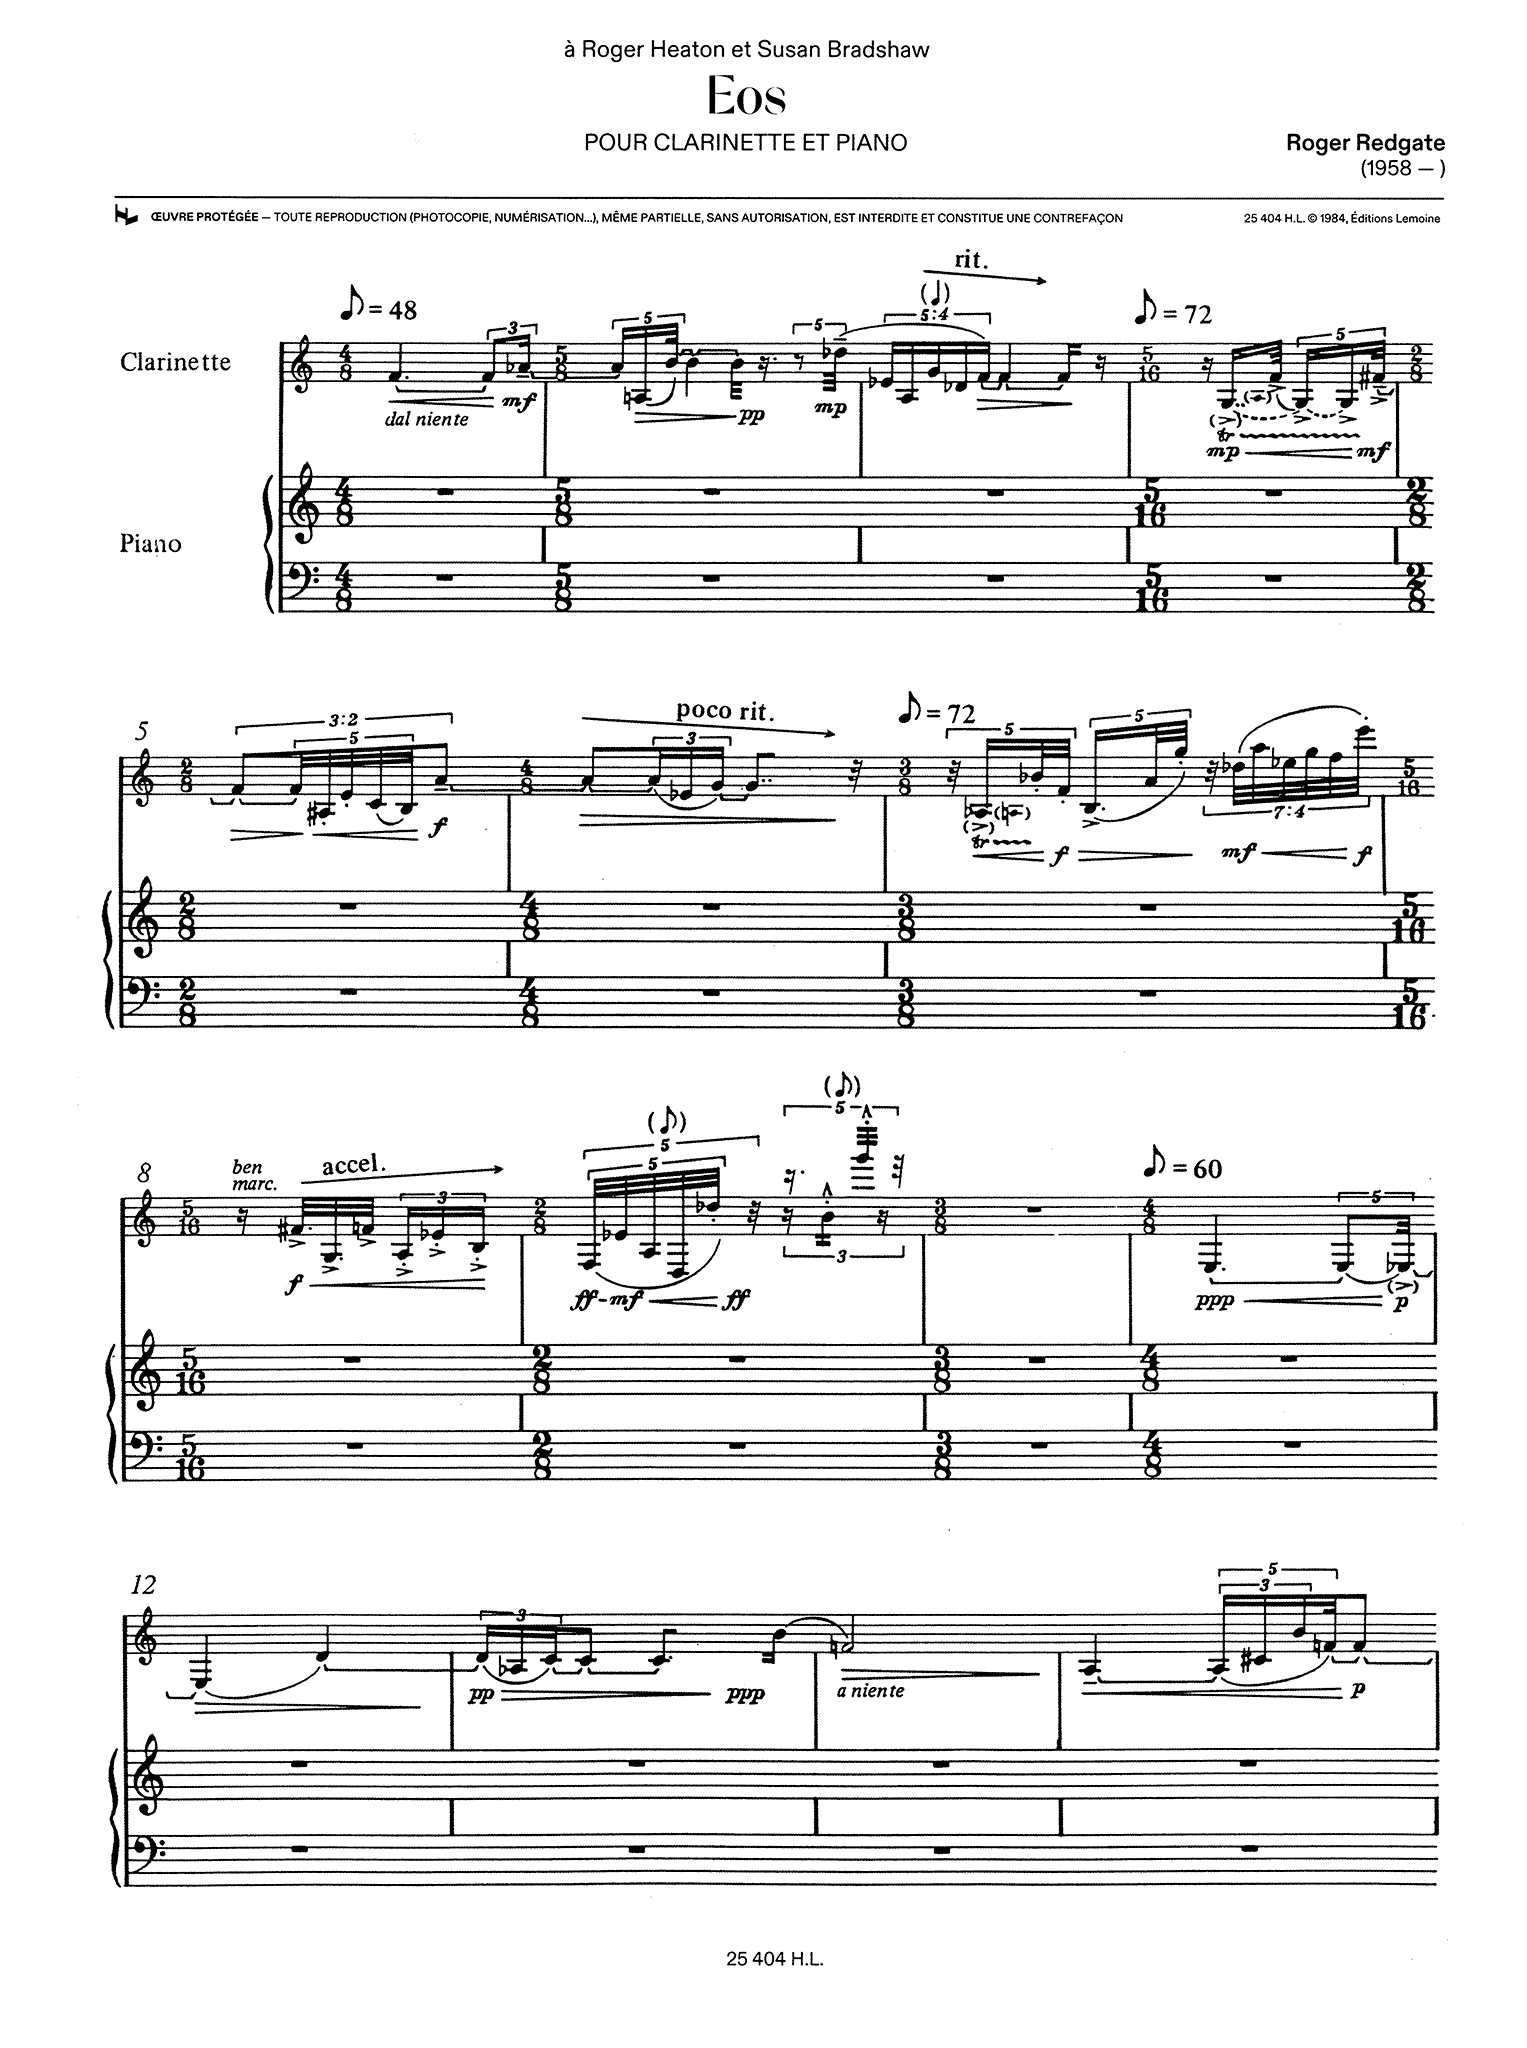 Redgate Eos clarinet and piano score